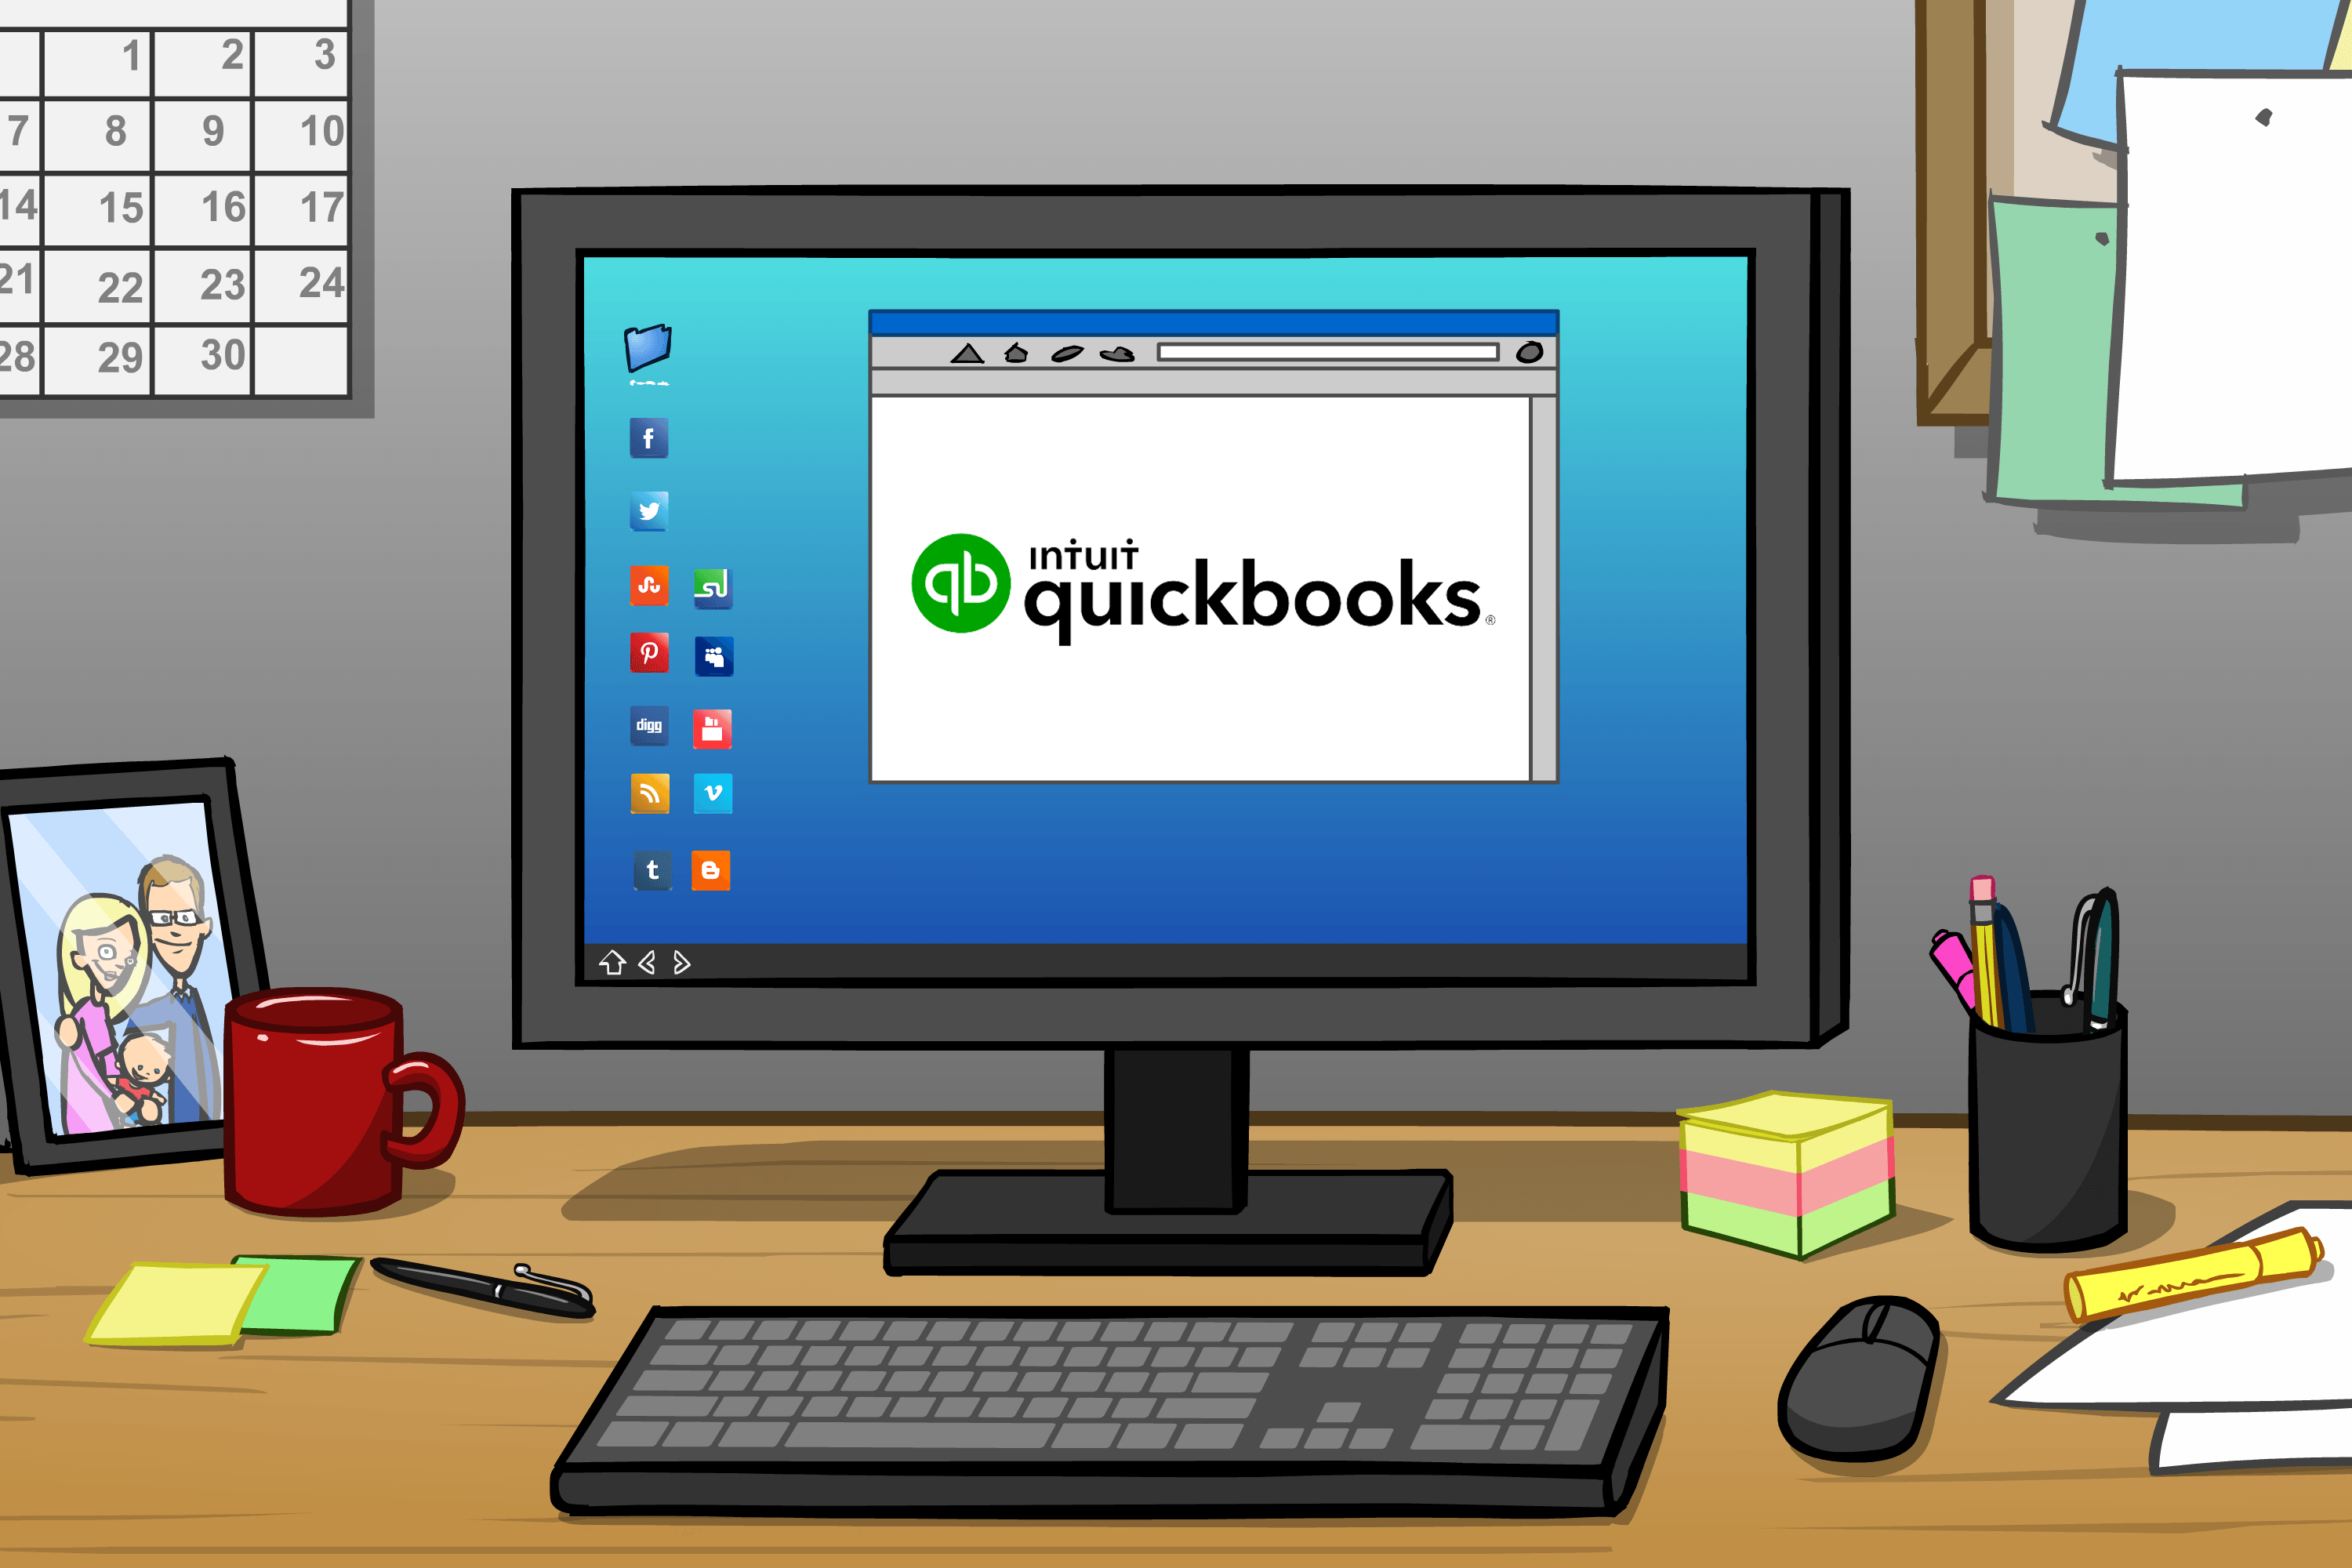 Nerds on Call provides, for small business, quickbooks supports